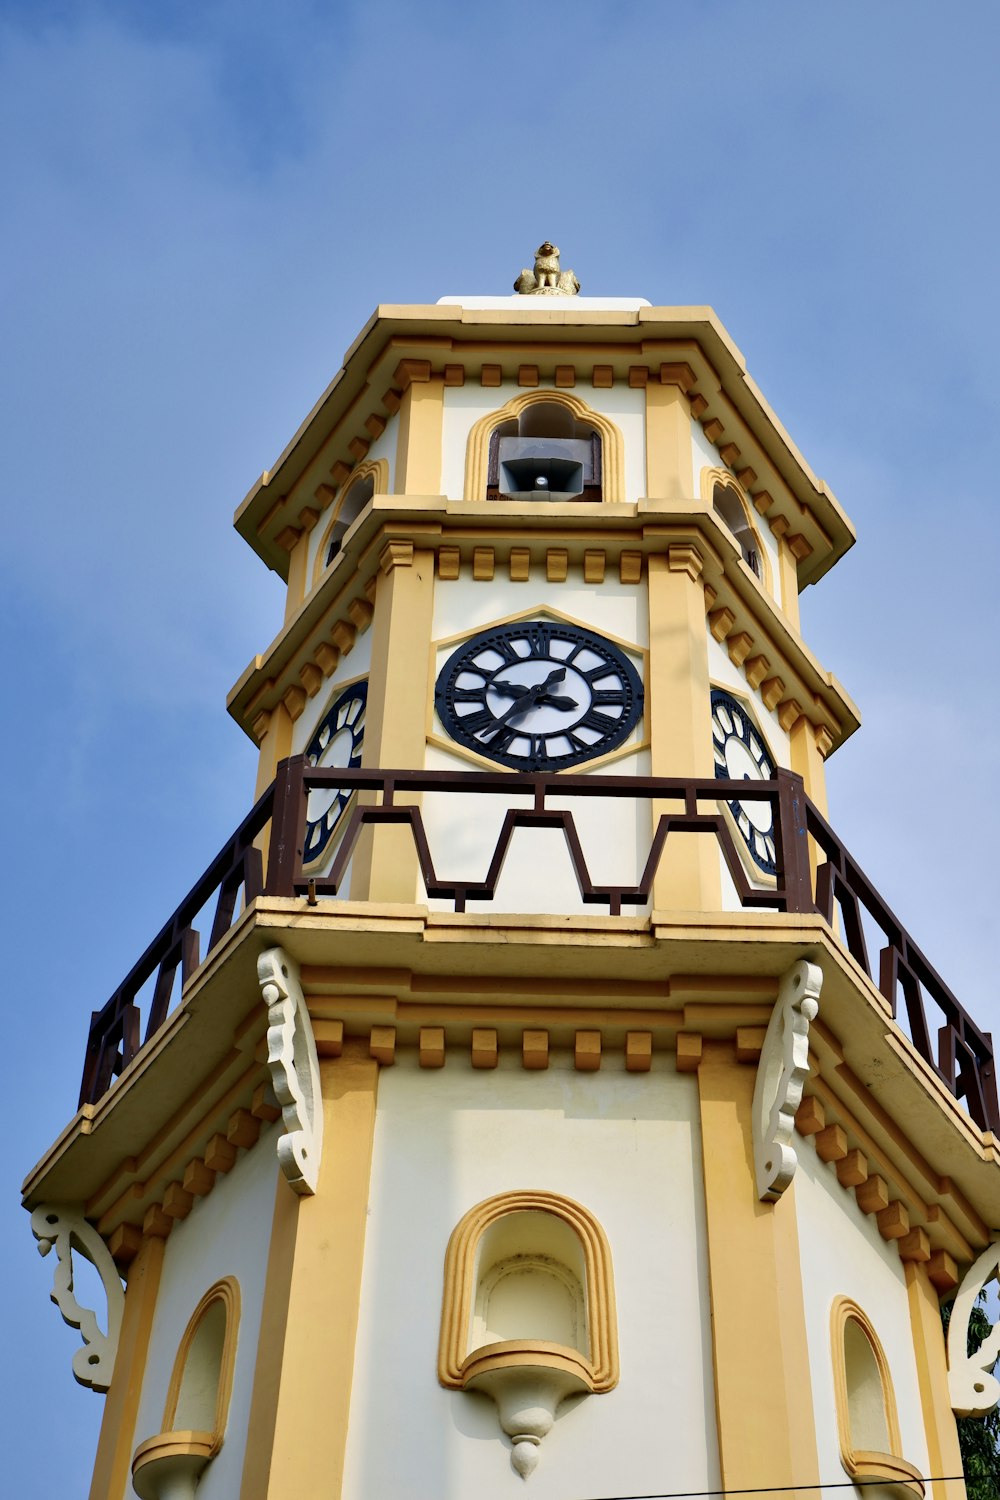 a yellow and white clock tower against a blue sky